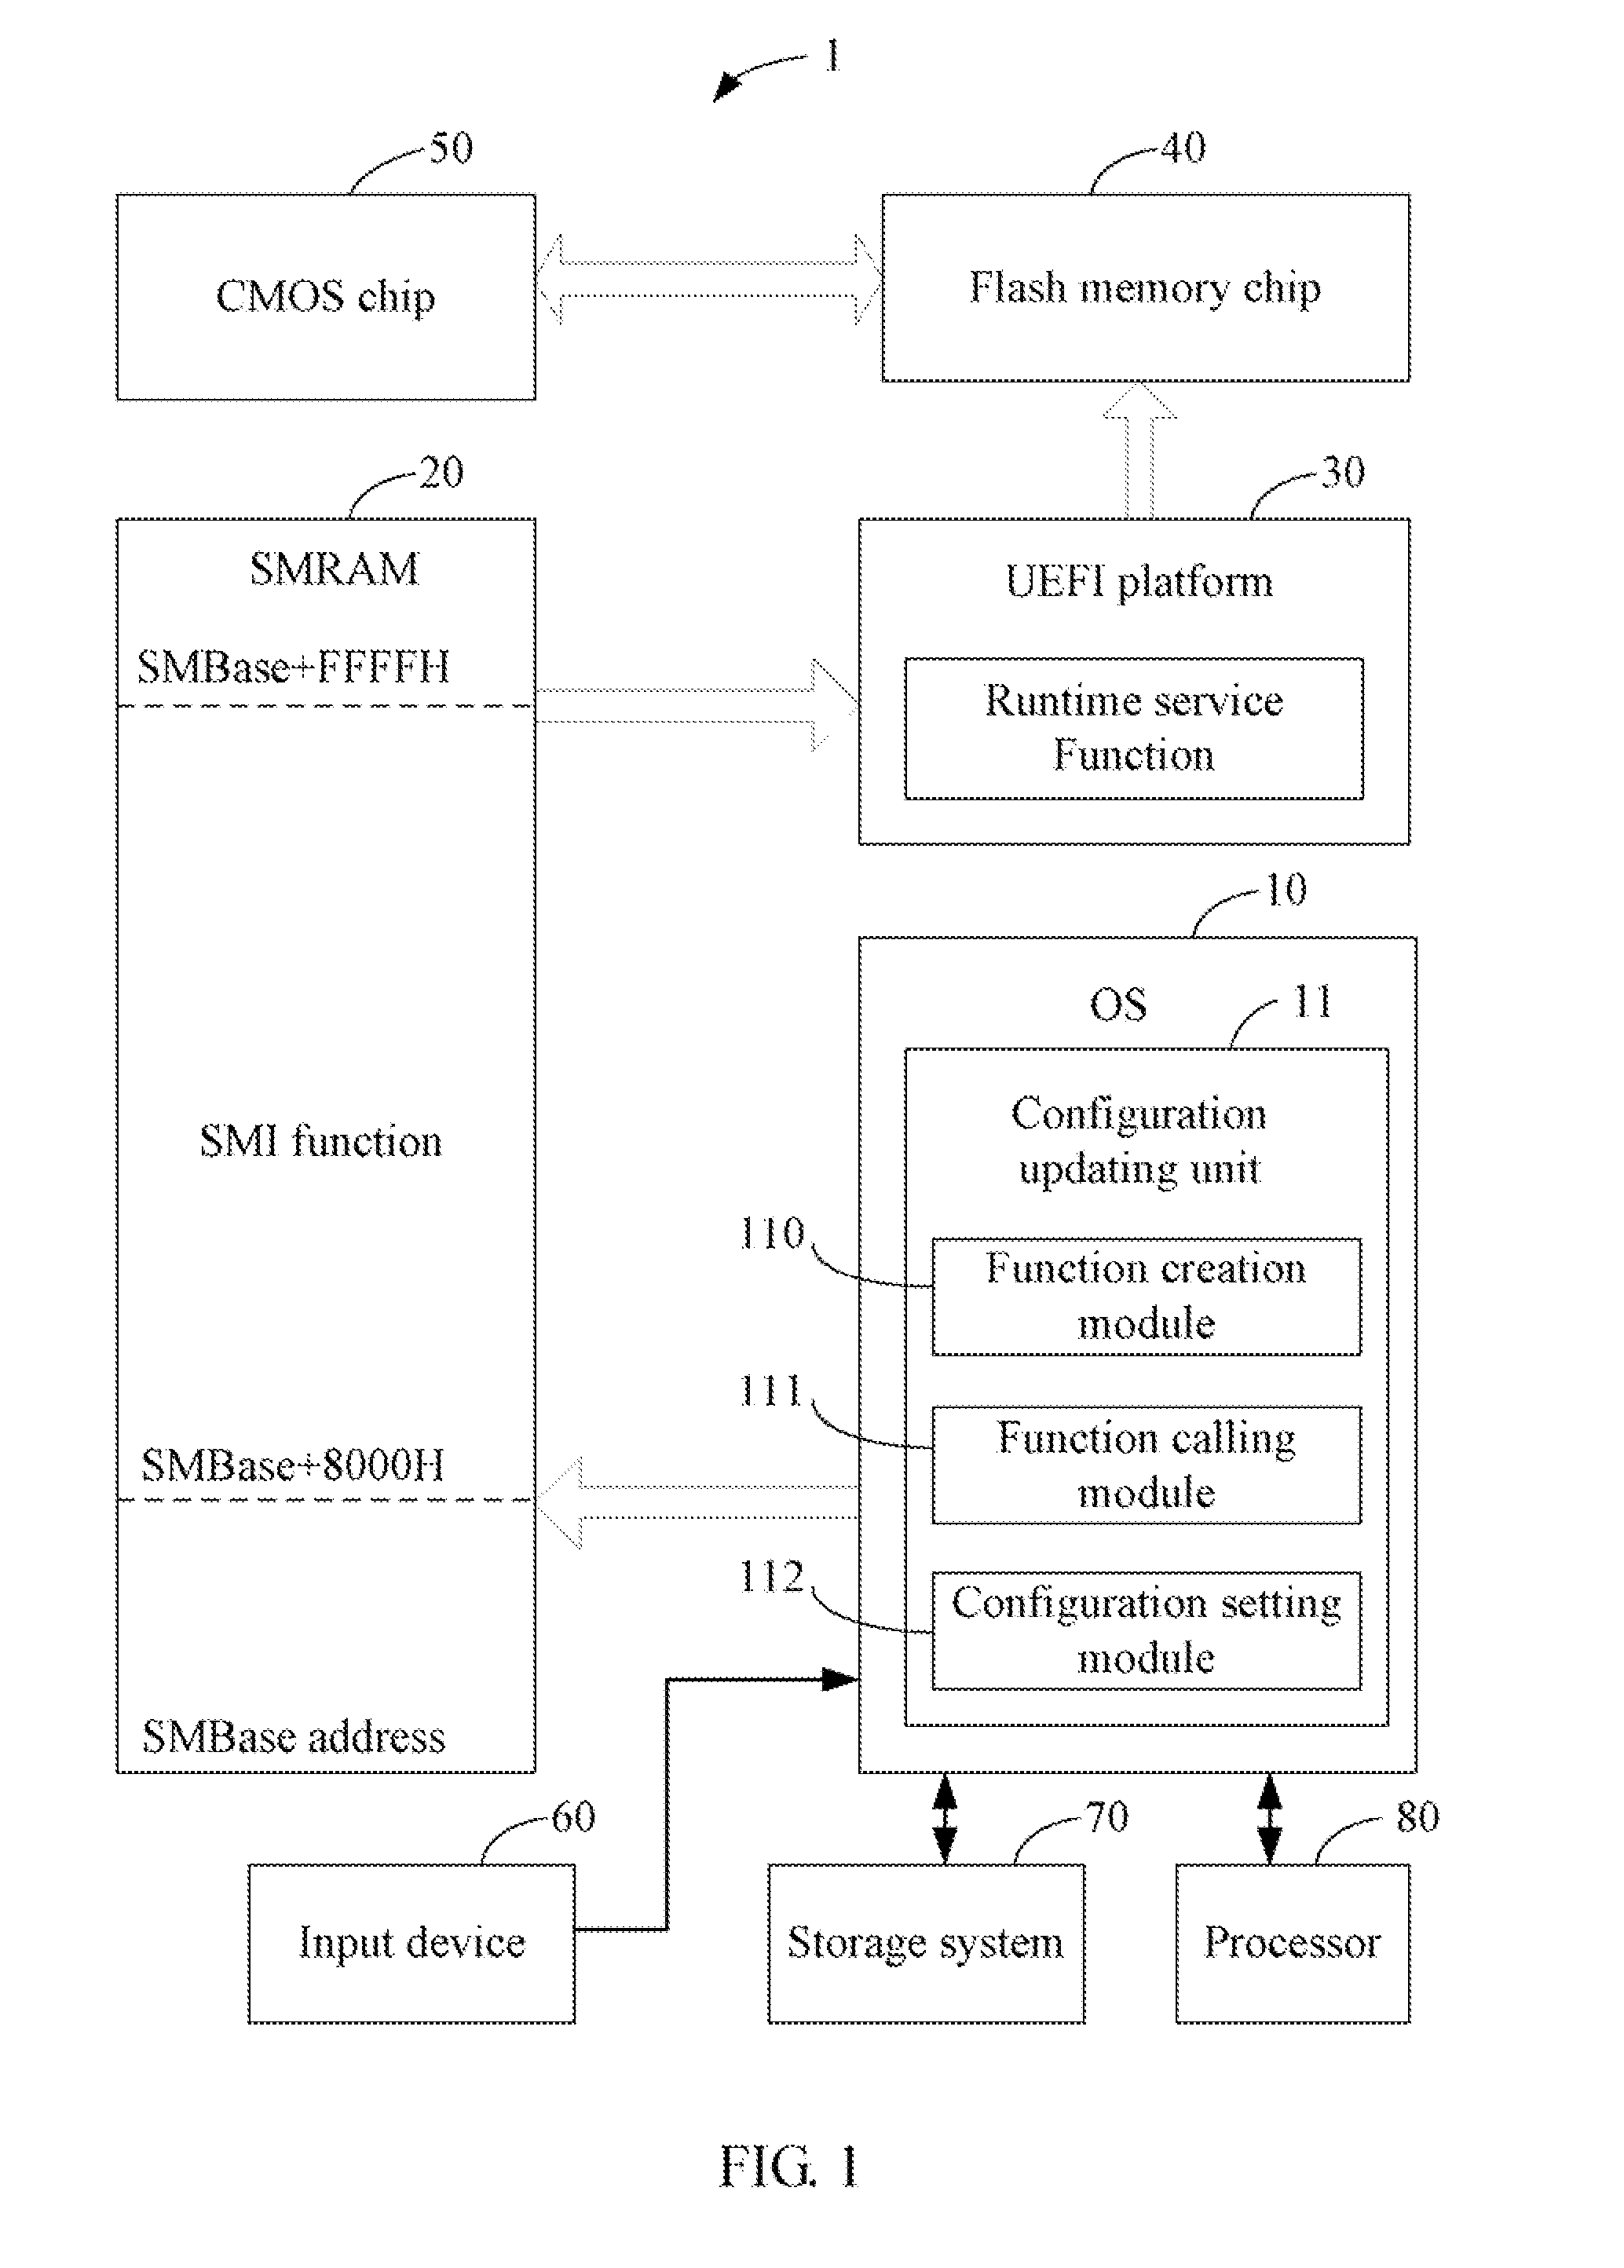 System and method for updating unified extensible firmware interface setting information